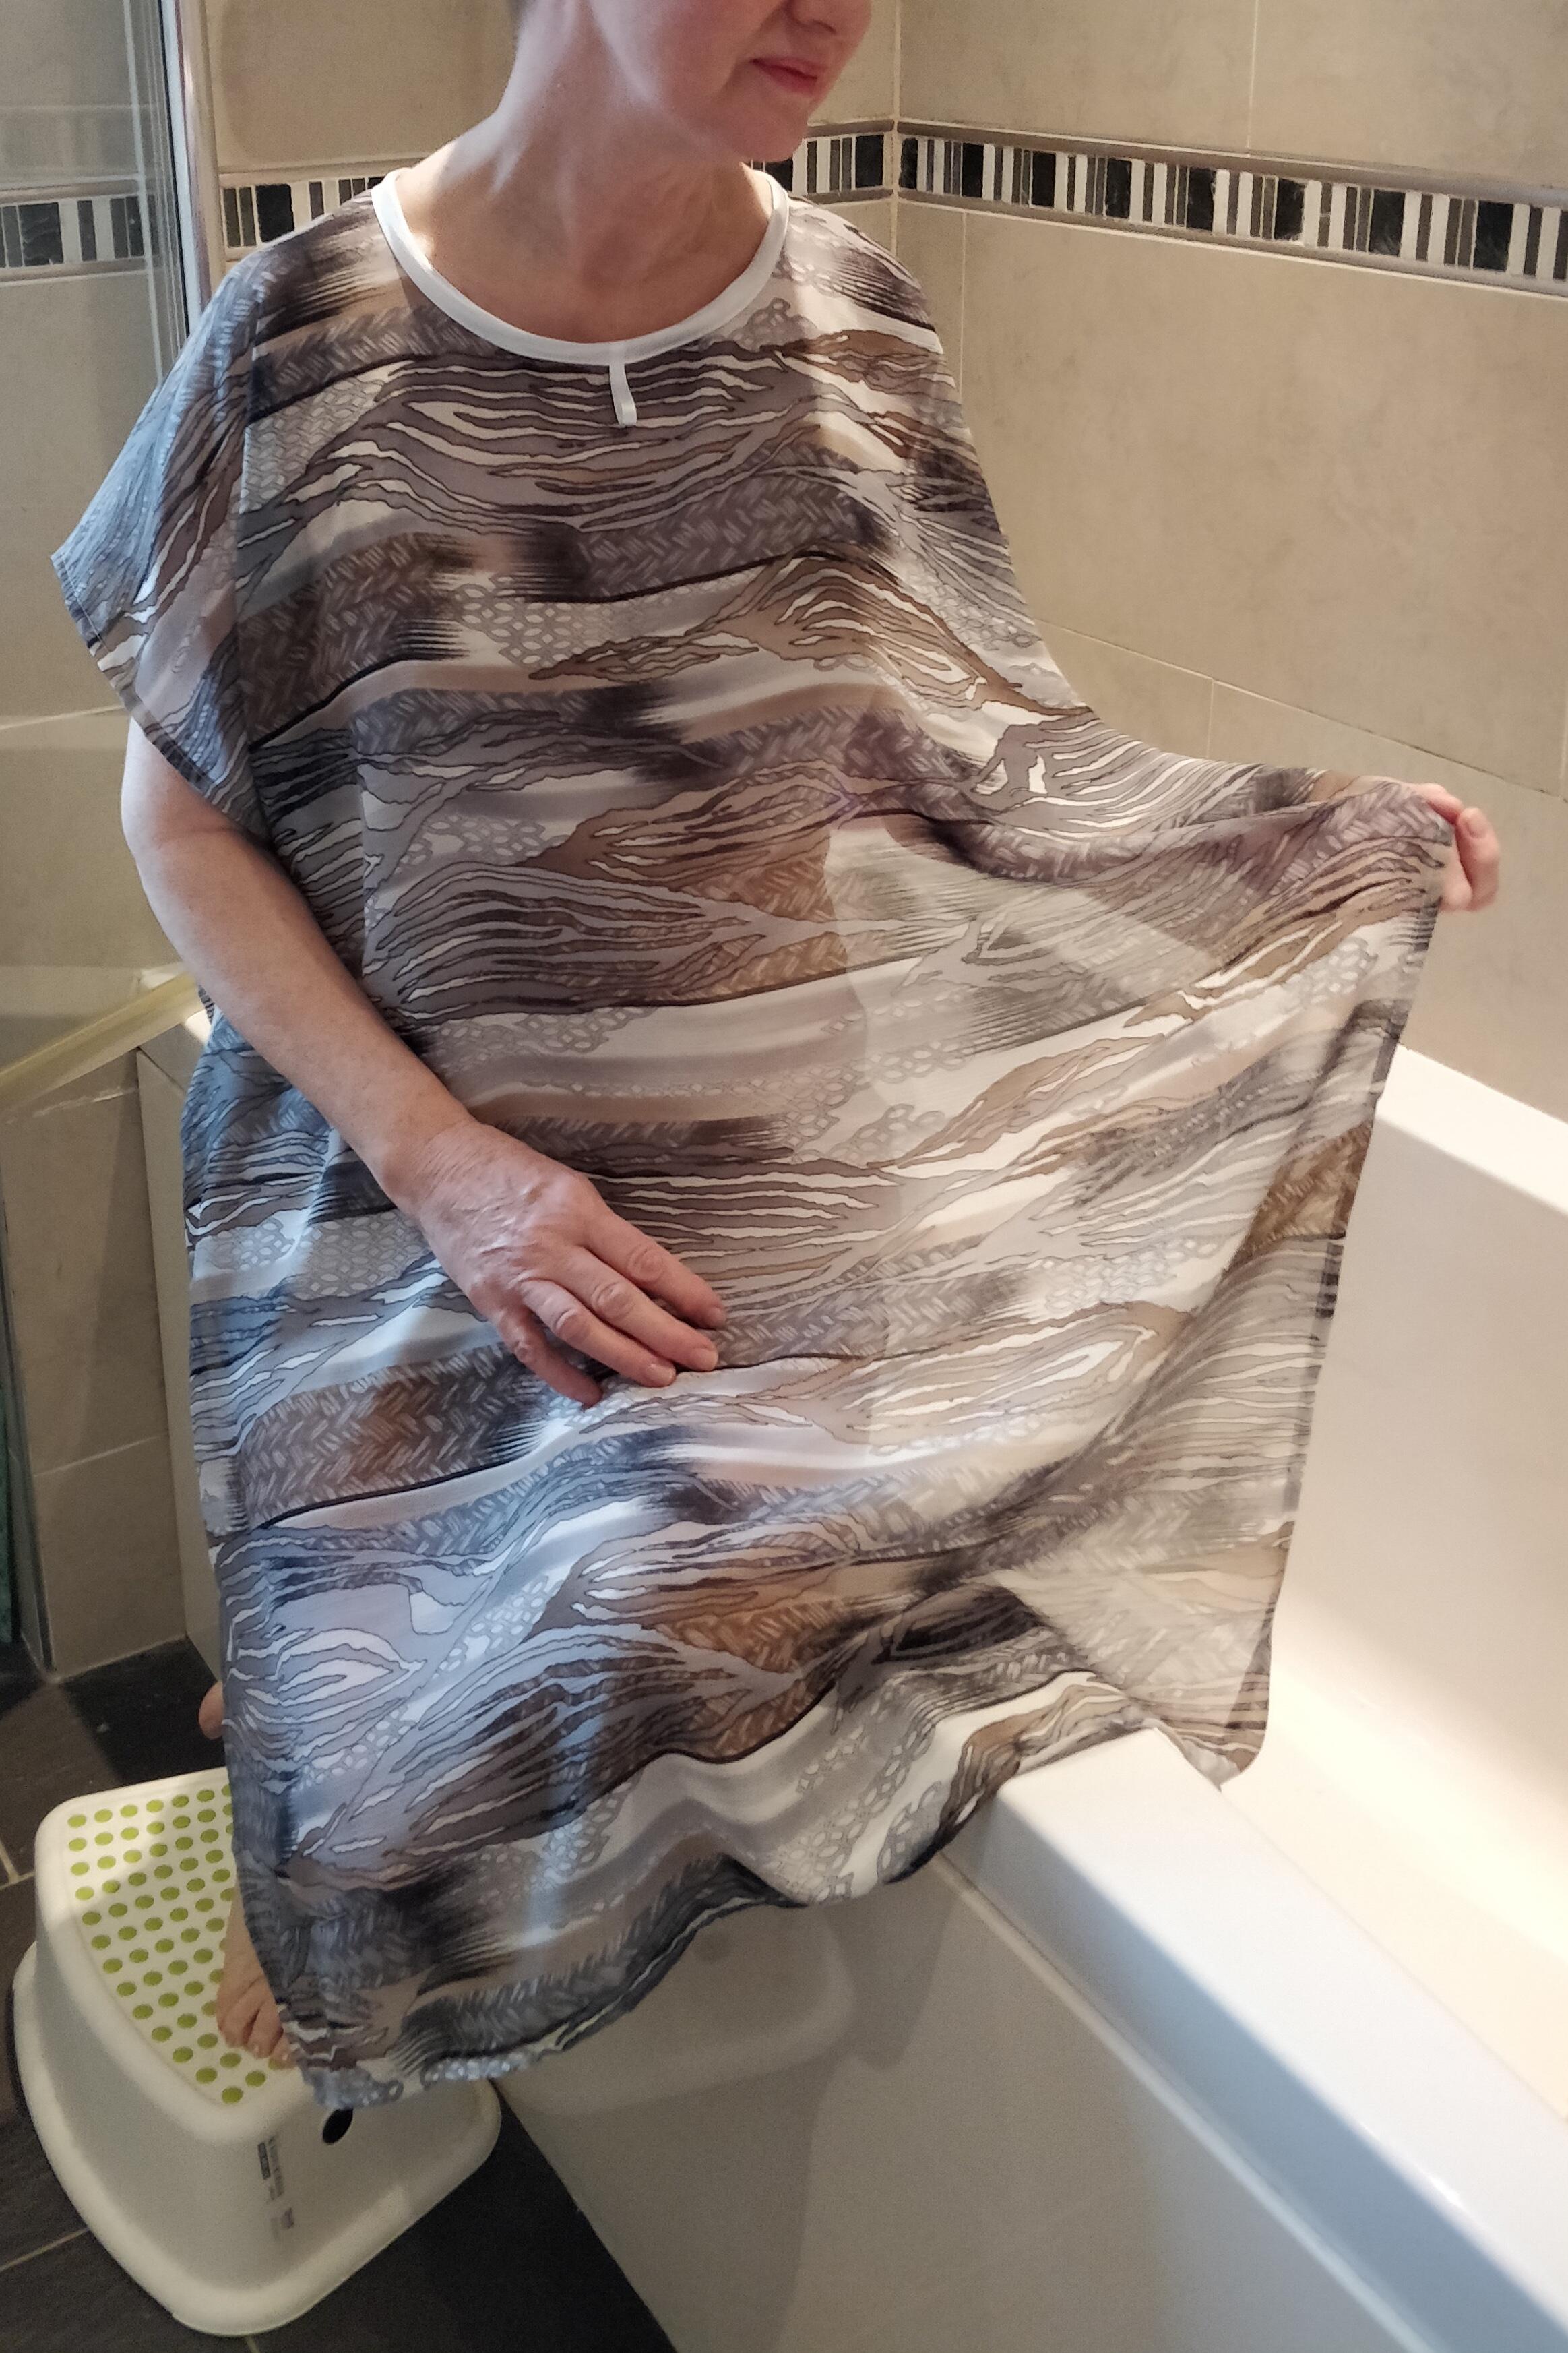 Grey/Beige abstract NeverNaked(tm) Shower Drapron® - dementia dignity showering cape drapes over shoulders to be left on whilst showering so dignity is maintained. No sleeves. Small magnetic fastening at back